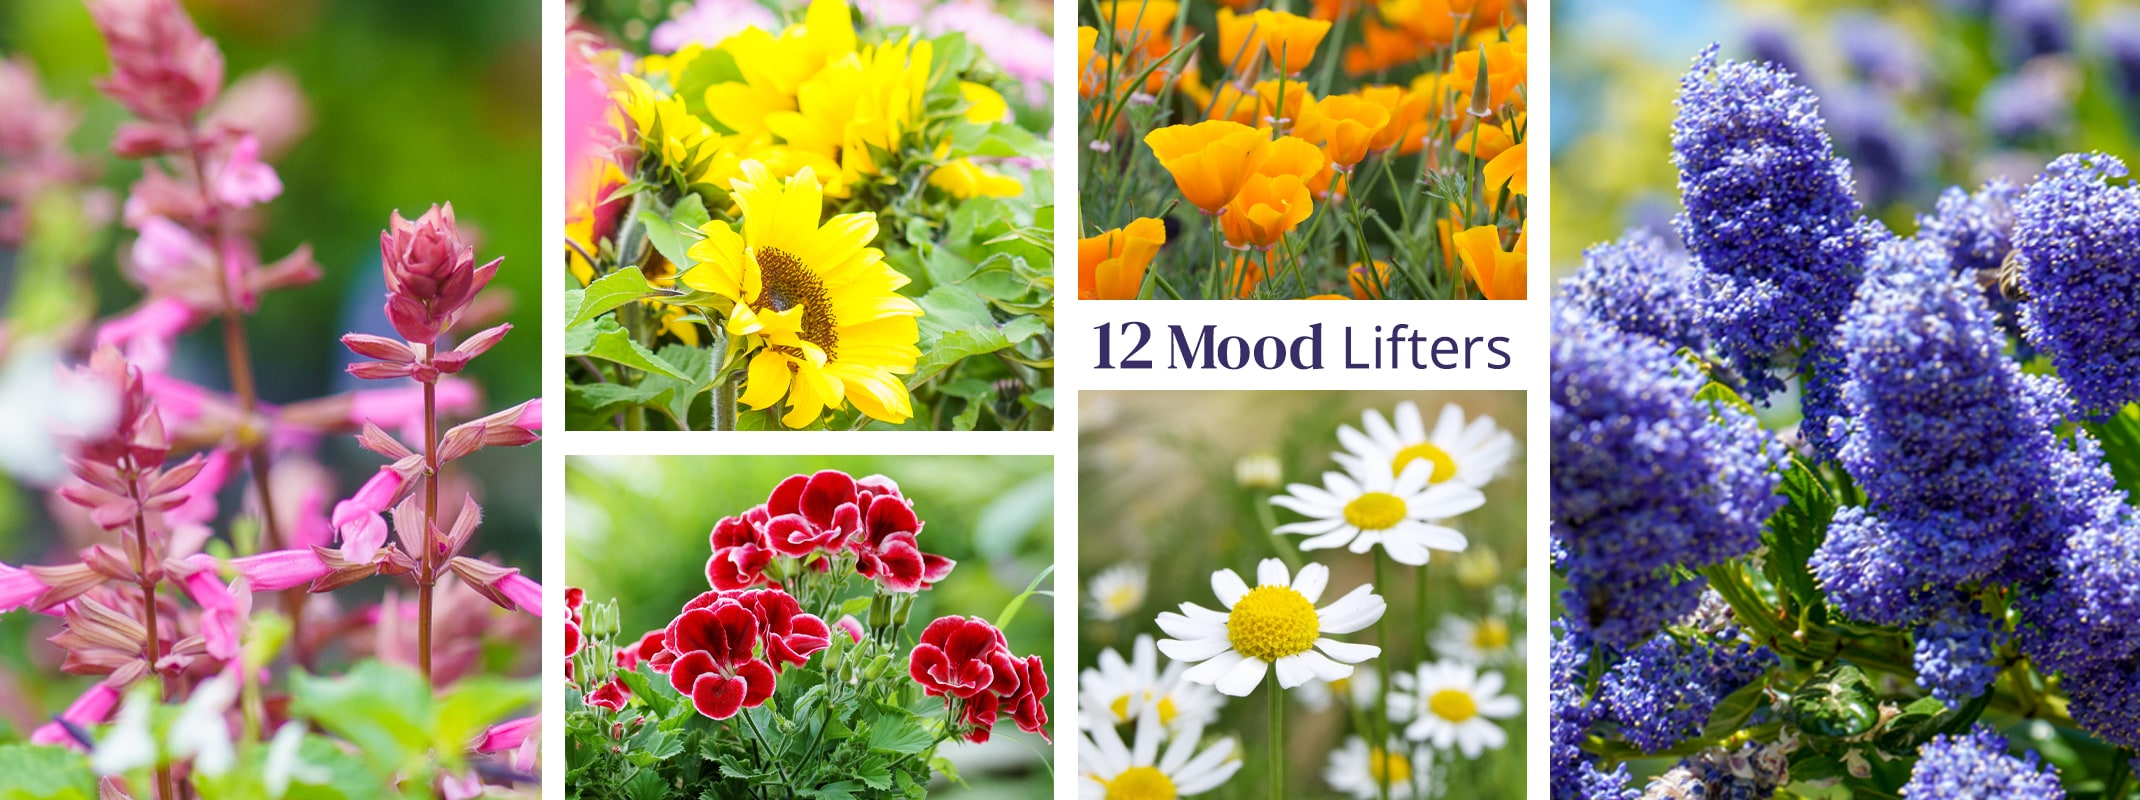 12 mood lifter plants, salvia, sunflowers, geraniums, california poppies, ceanothus and chamomile